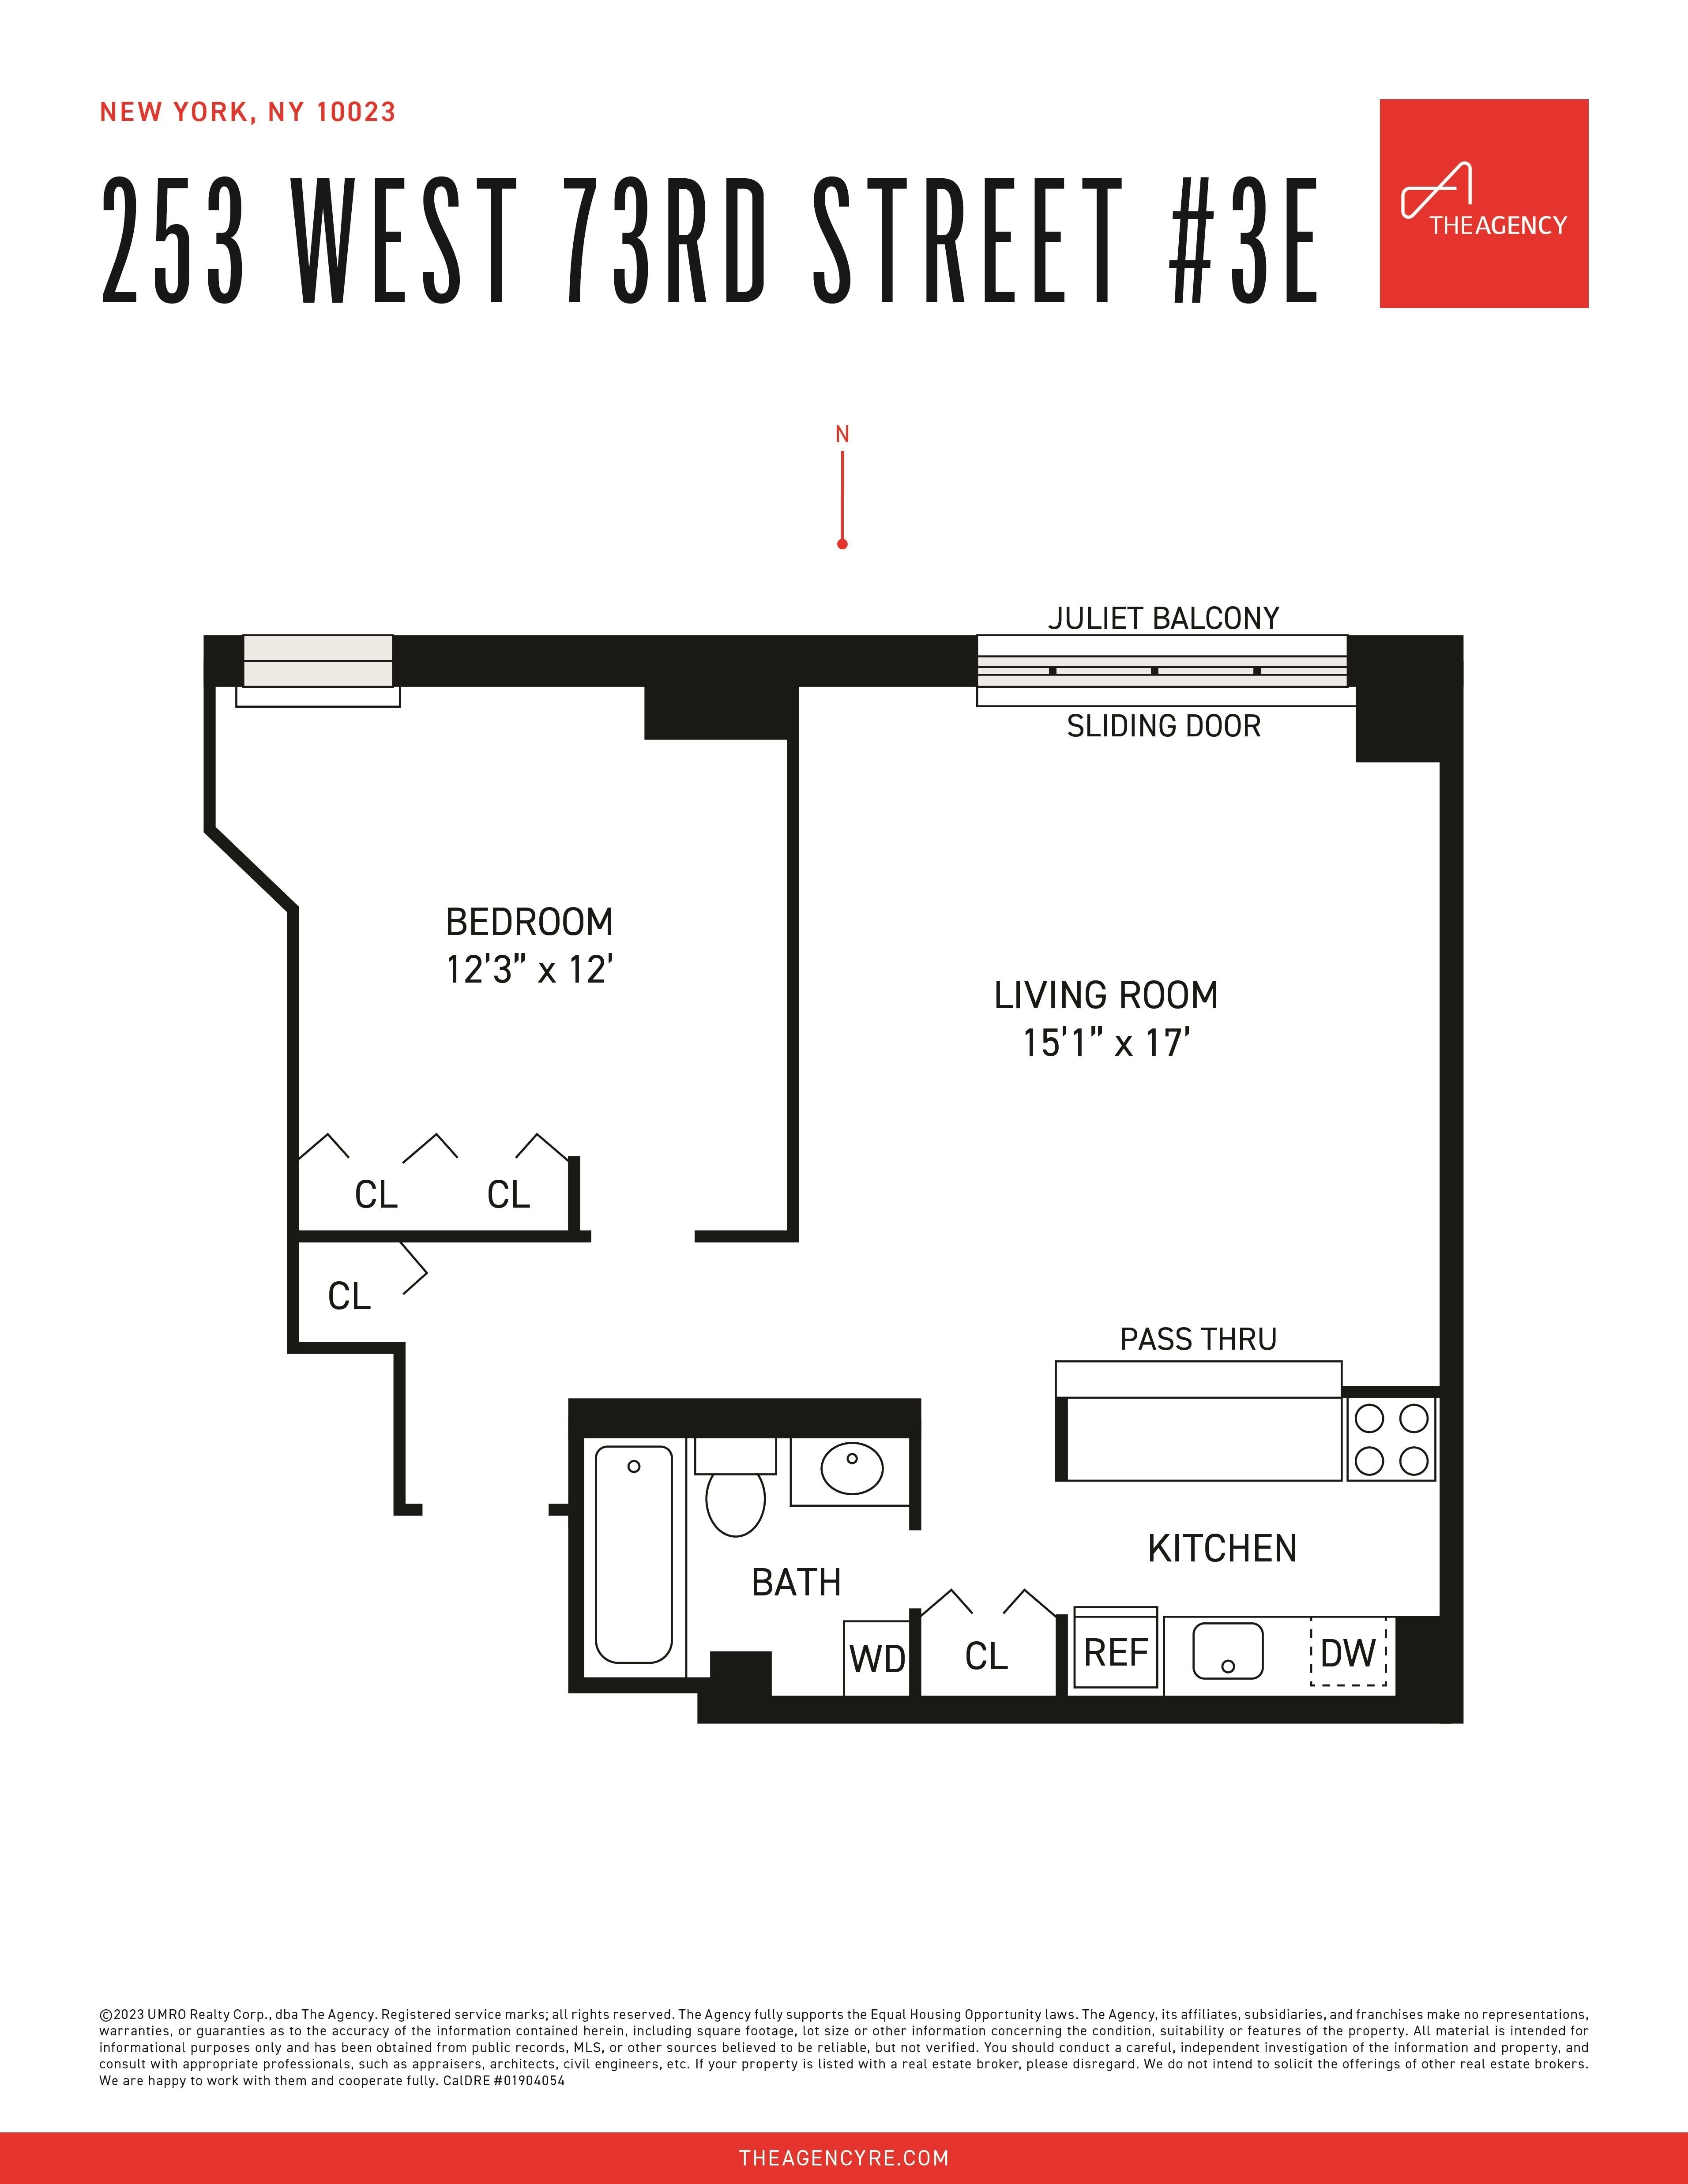 Property at Level Club, 253 W 73RD ST, 3E Upper West Side, New York, New York 10023